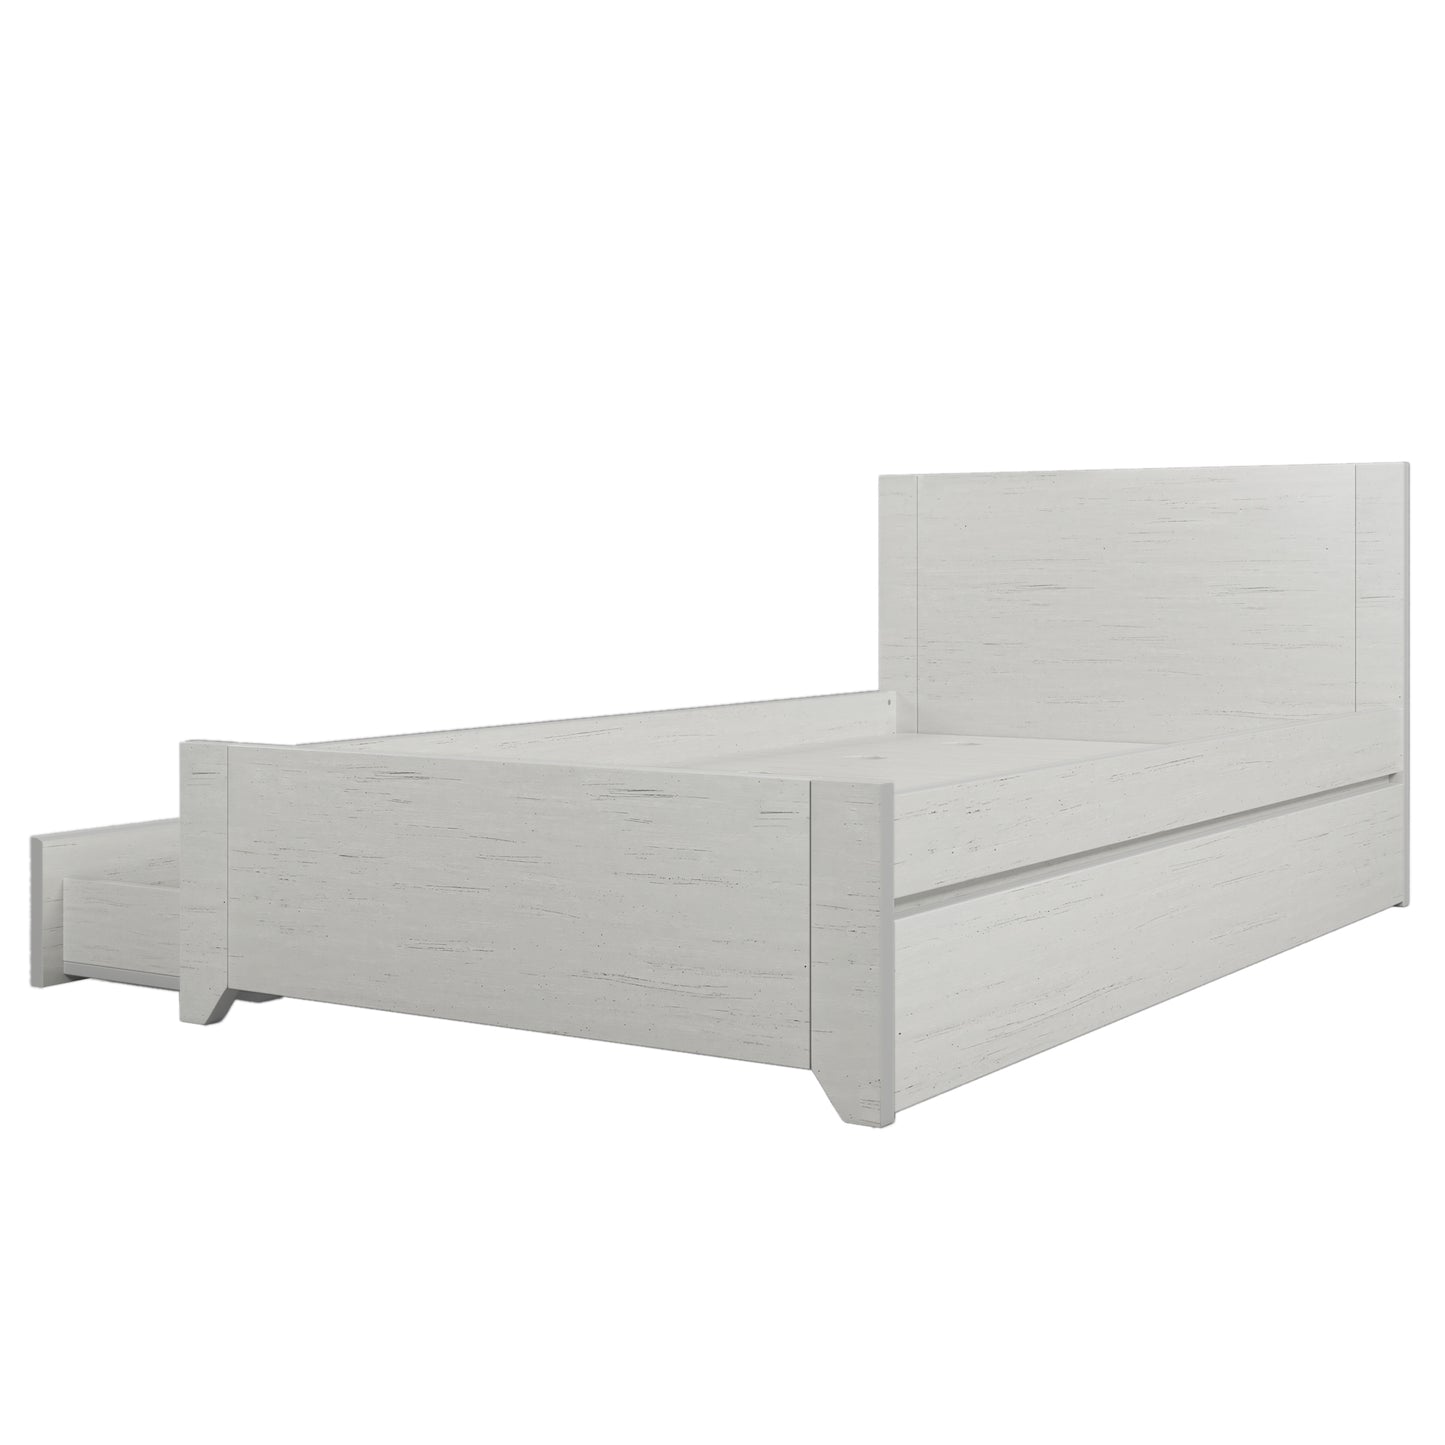 Twin Size Wood Platform Bed with Reversible Pull-out Storage Drawer Under, Gray Wood Grain